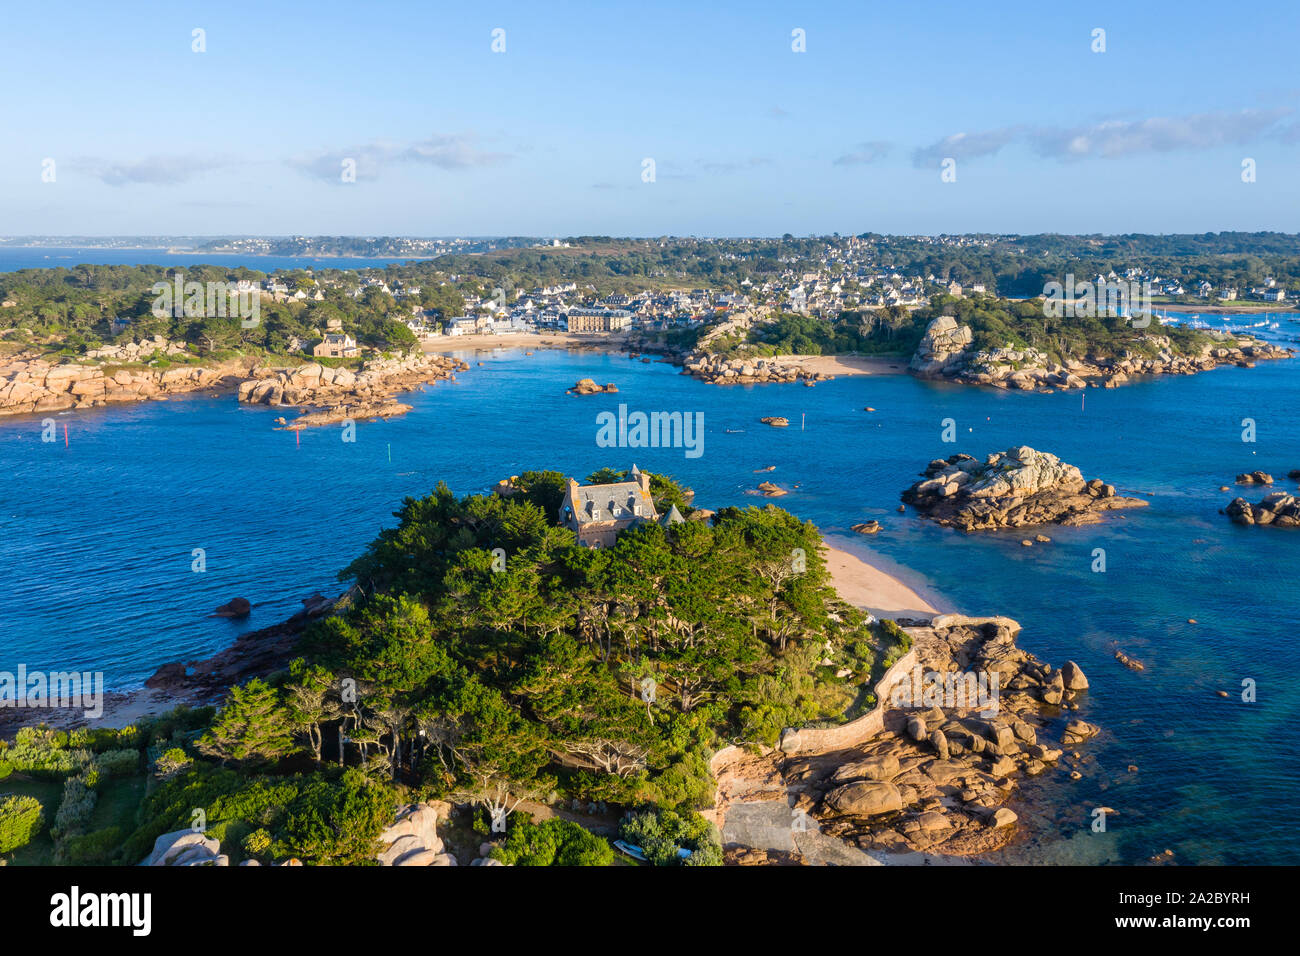 France, Cotes d'Armor, Cote de granit rose (Pink Granite Coast), Tregastel, Saint Guirec cove with Costaeres island and castle in the foreground (aeri Stock Photo